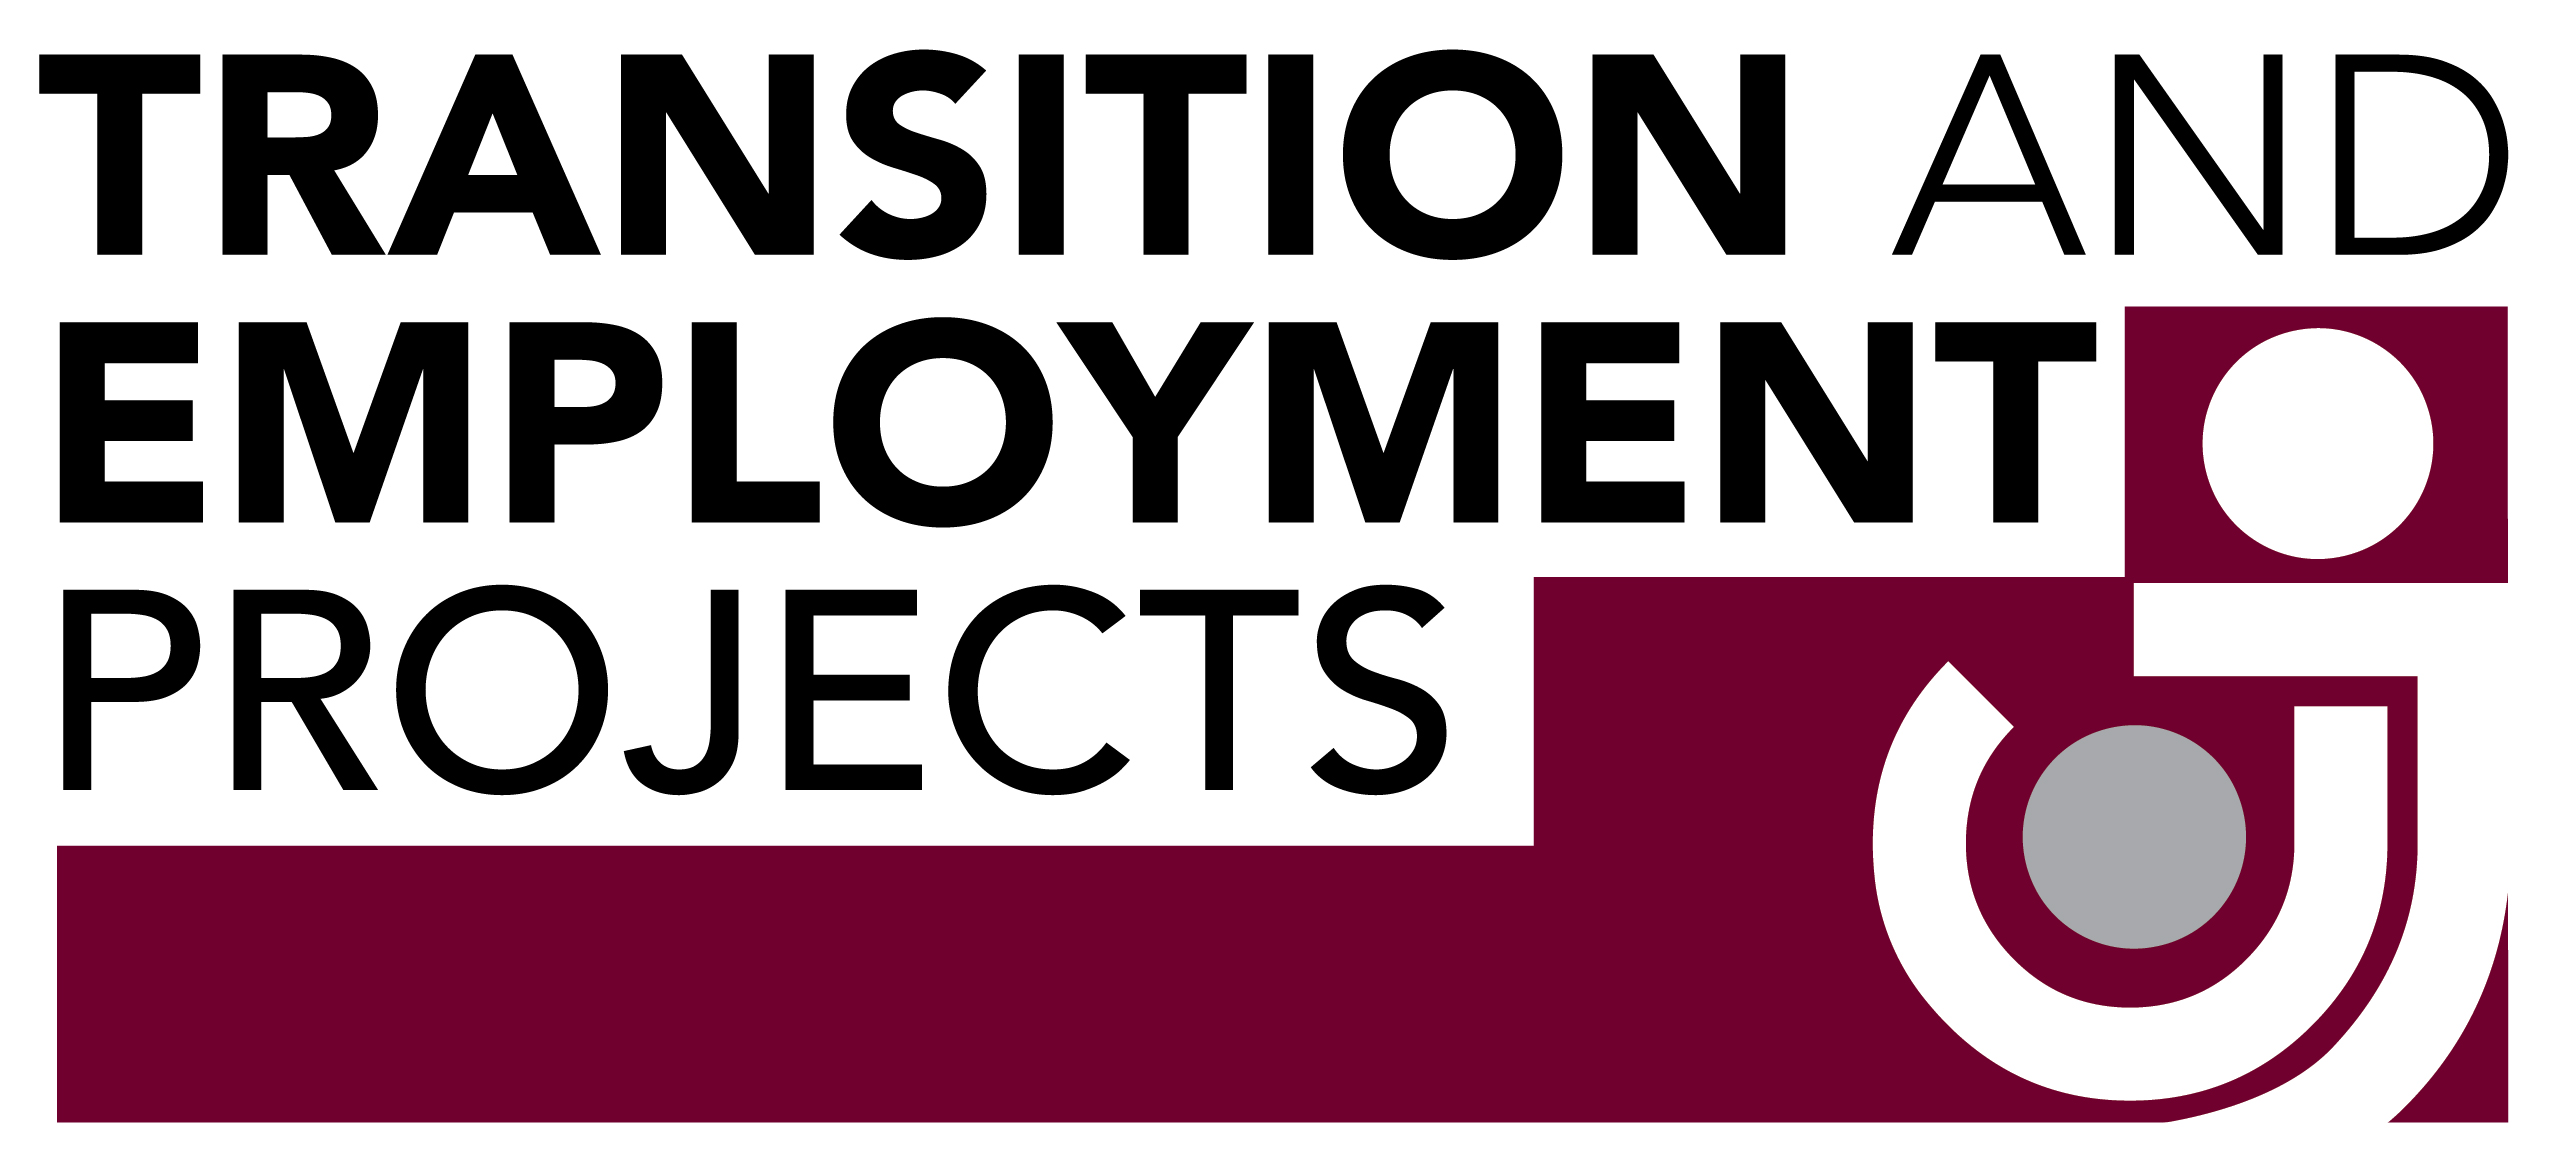 Transition and employment projects program logo